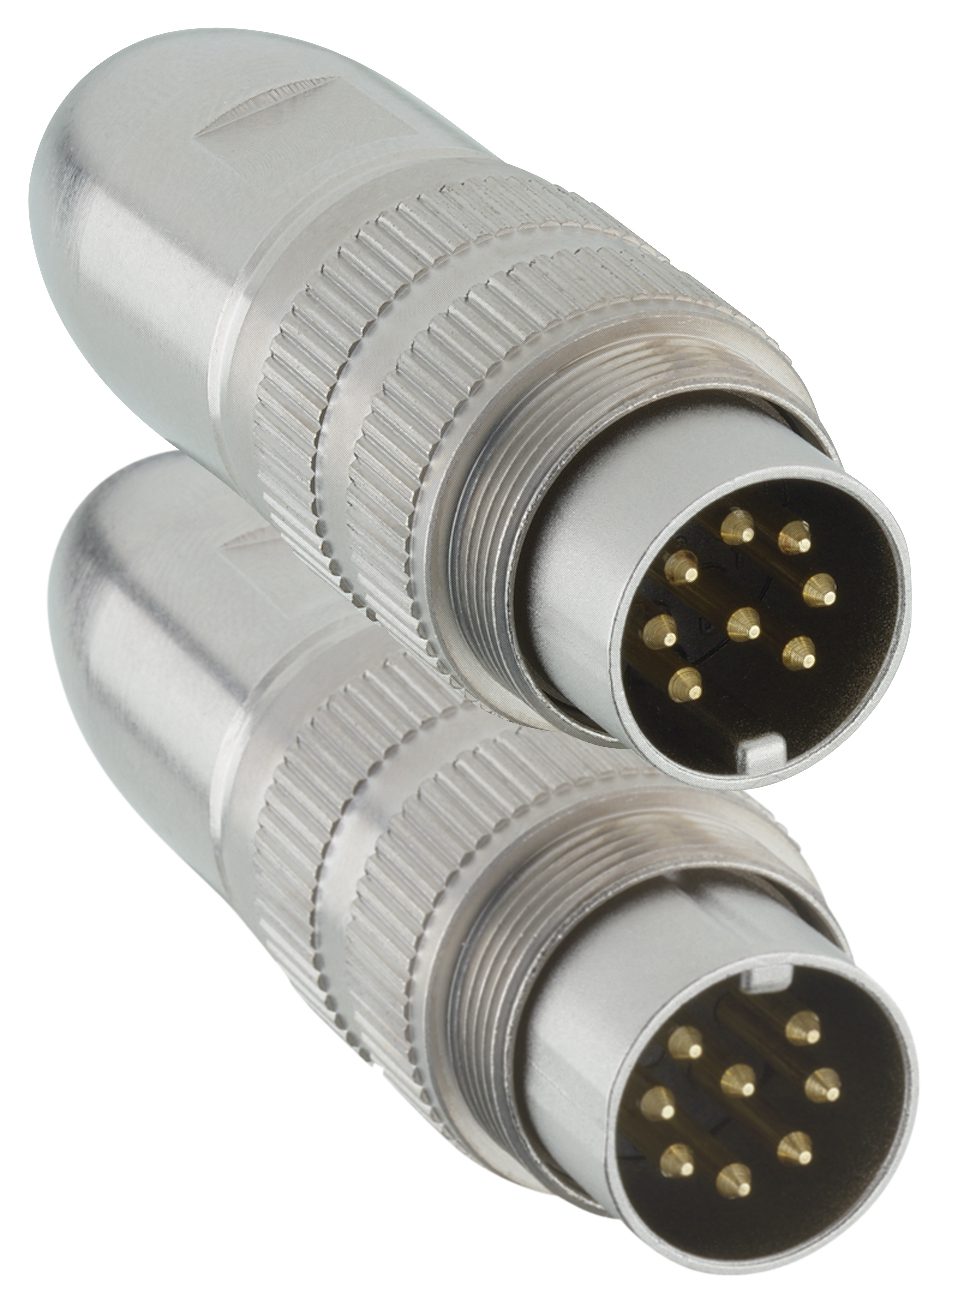 Lumberg’s circular connector 033200 according to AISG specification C485